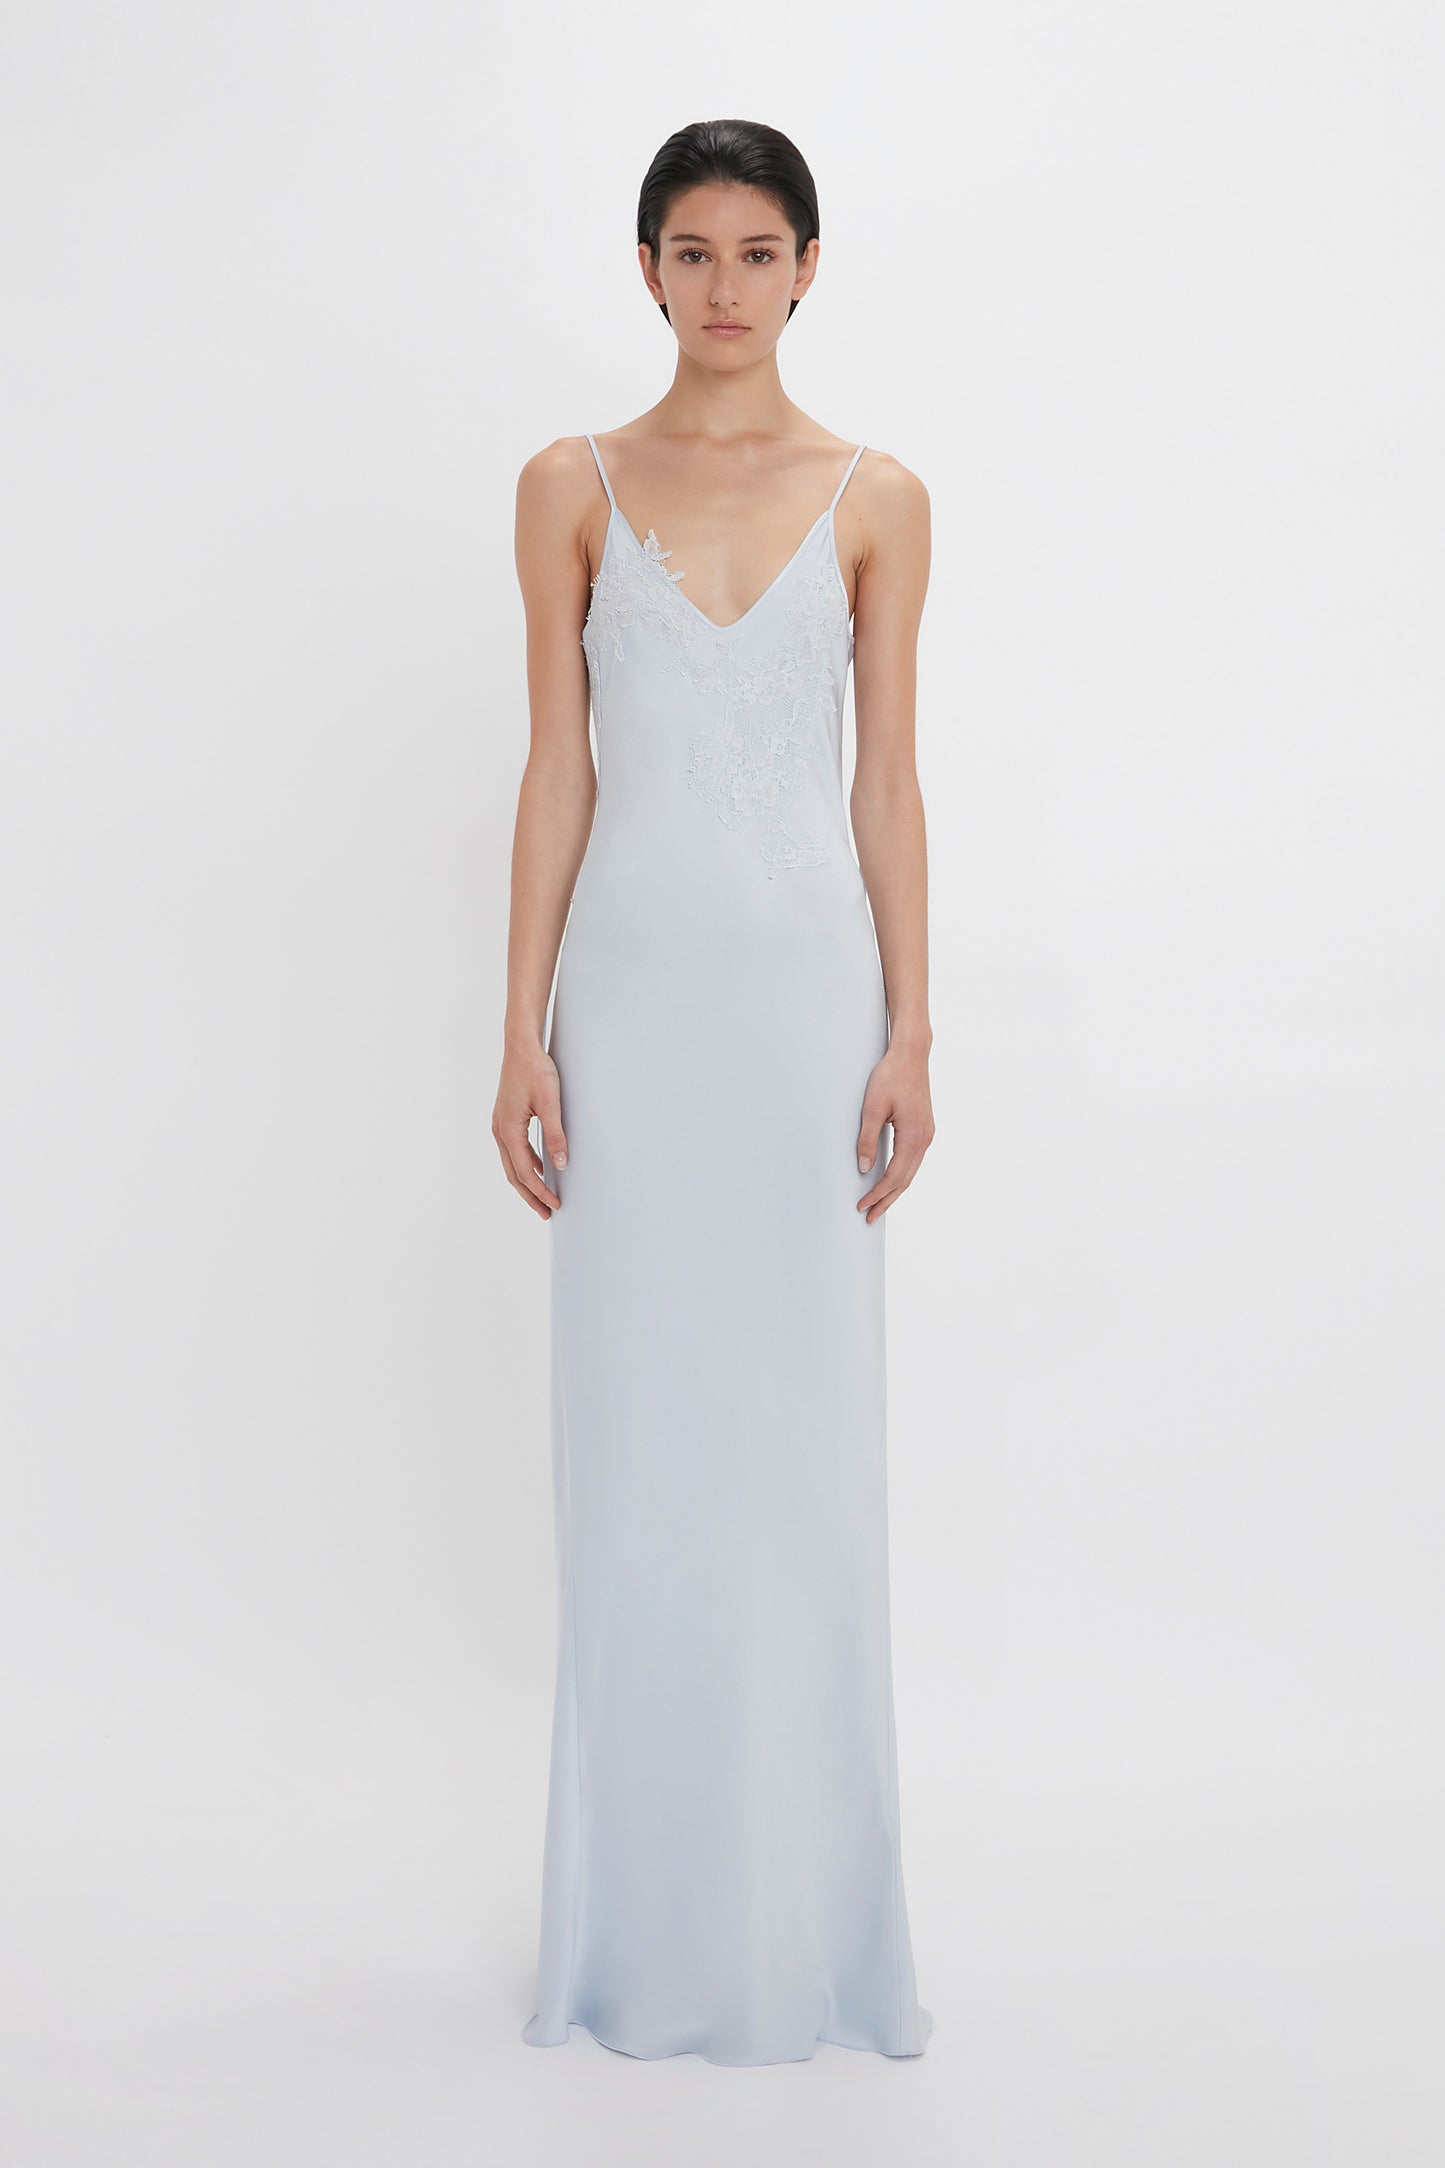 A woman in an Exclusive Lace Detail Floor-Length Cami Dress In Ice by Victoria Beckham, with spaghetti straps and lace detailing at the bodice, standing against a white background.